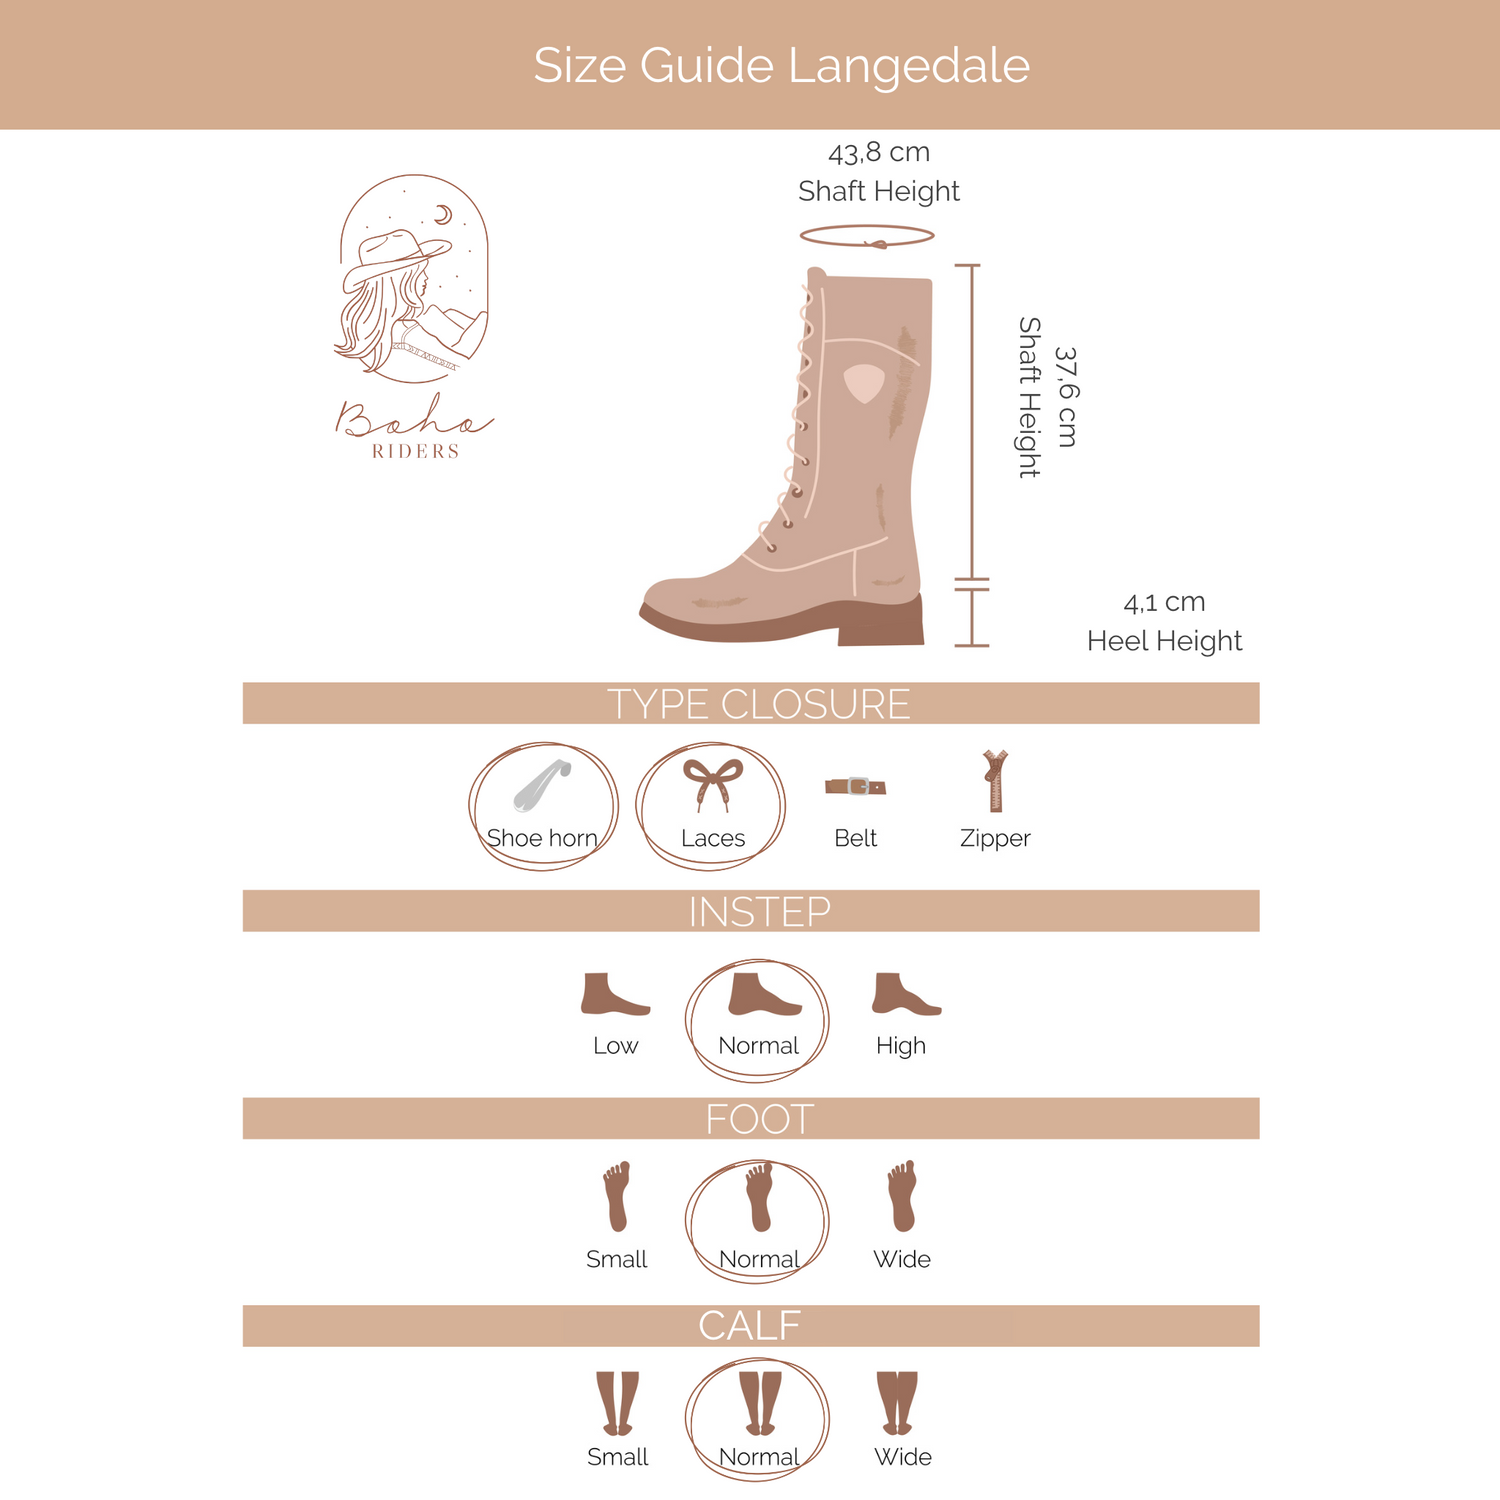 What you want to know about the fit ofAriat Langdale H2O Waterproof - Riding boots - Outdoorboot - Java - Waterproof